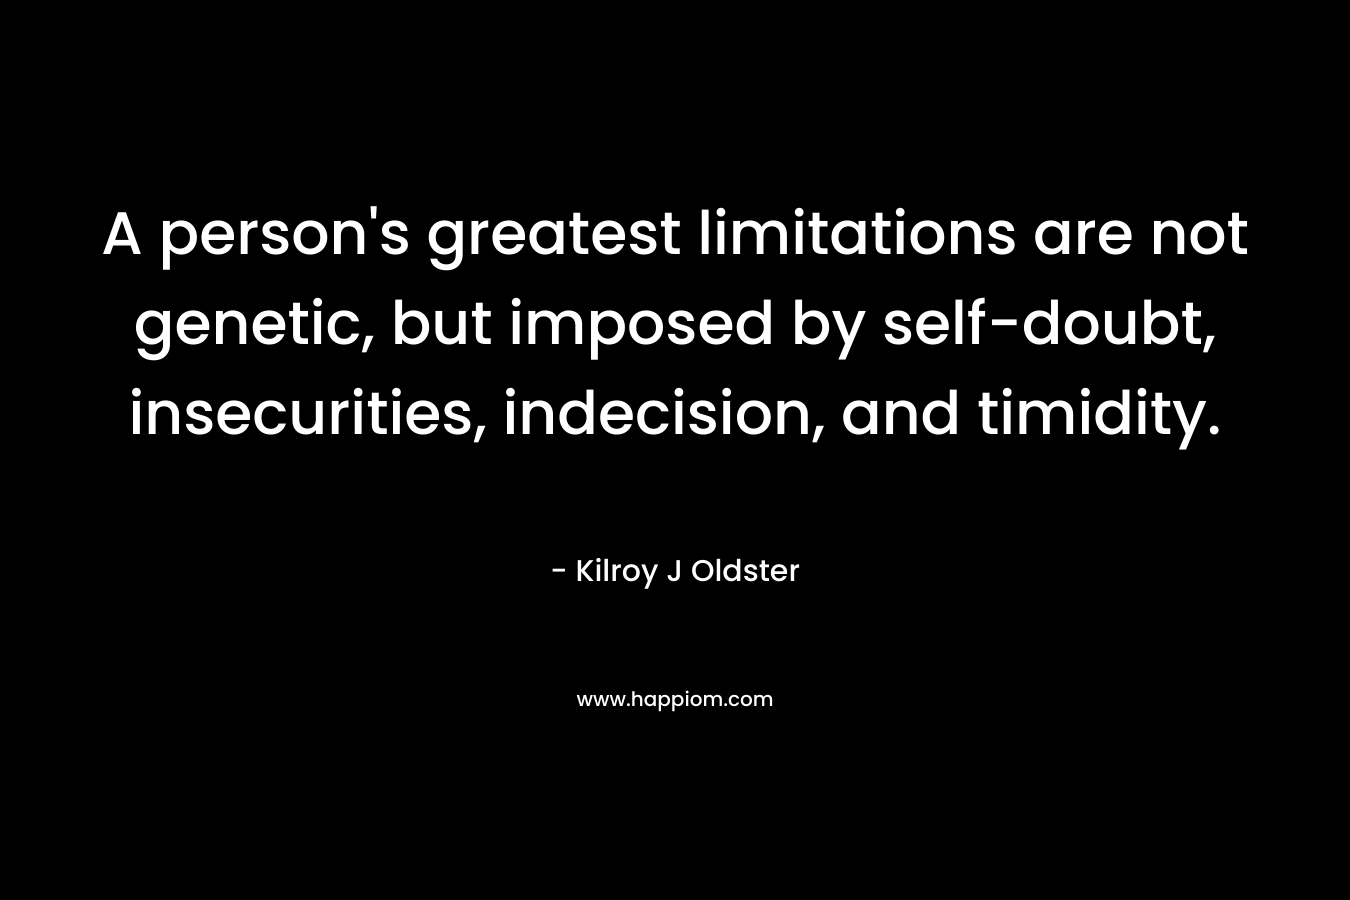 A person’s greatest limitations are not genetic, but imposed by self-doubt, insecurities, indecision, and timidity. – Kilroy J Oldster